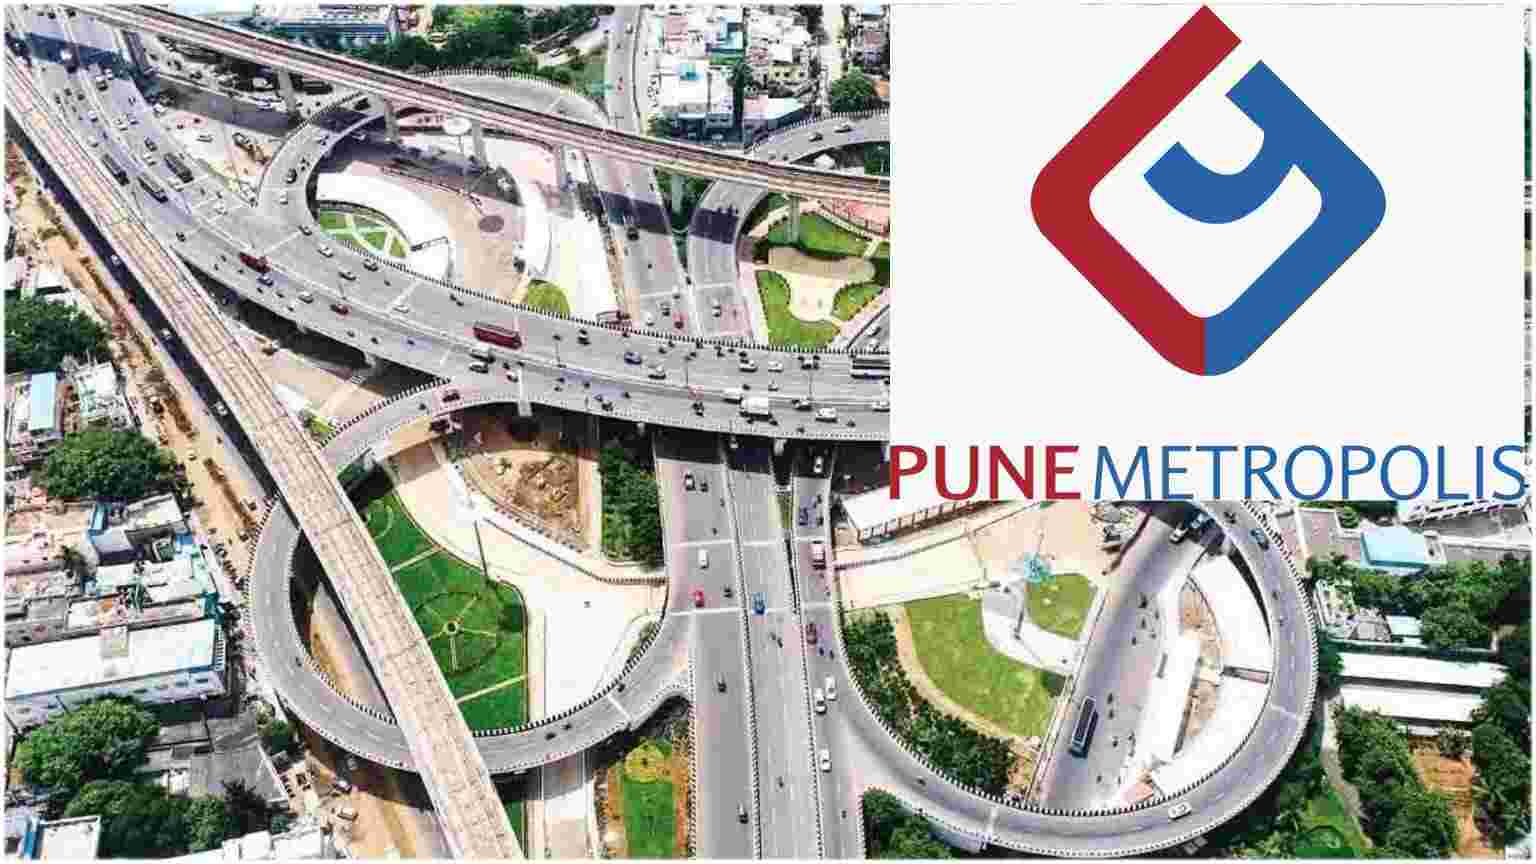 Pune: Land acquired in 14 villages for ring road project - PUNE.NEWS